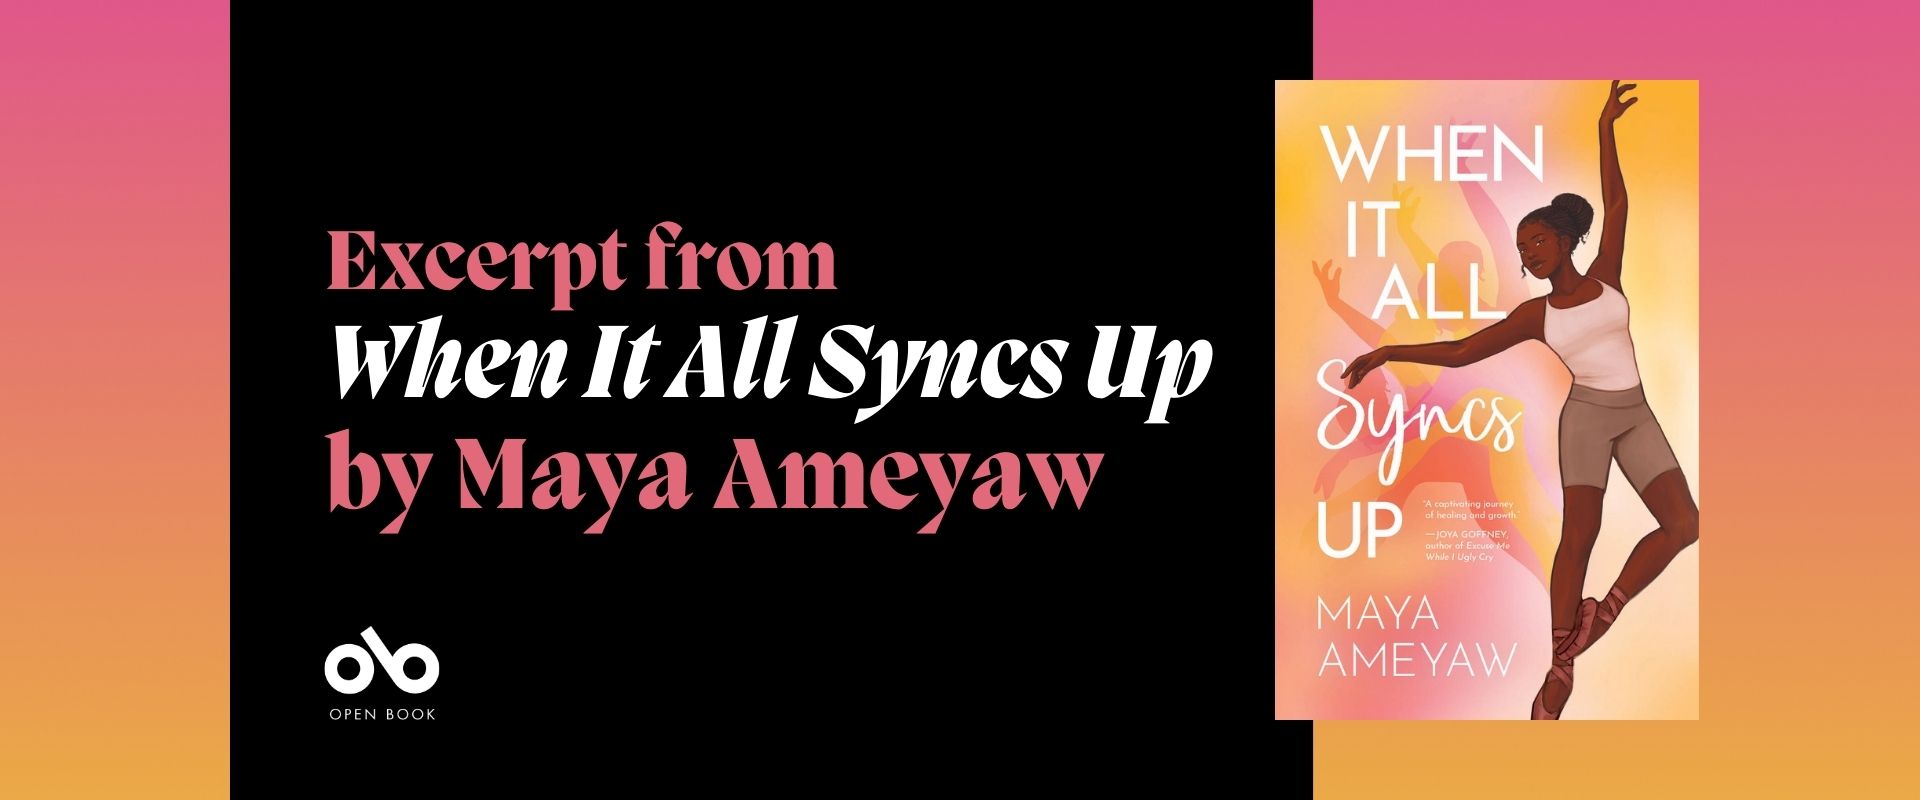 Pink and peach coloured banner image with black foreground and text reading “Excerpt from When It All Syncs Up by Maya Ameyaw”. Cover of When It All Syncs Up by Maya Ameyaw on the right, Open Book logo on the left